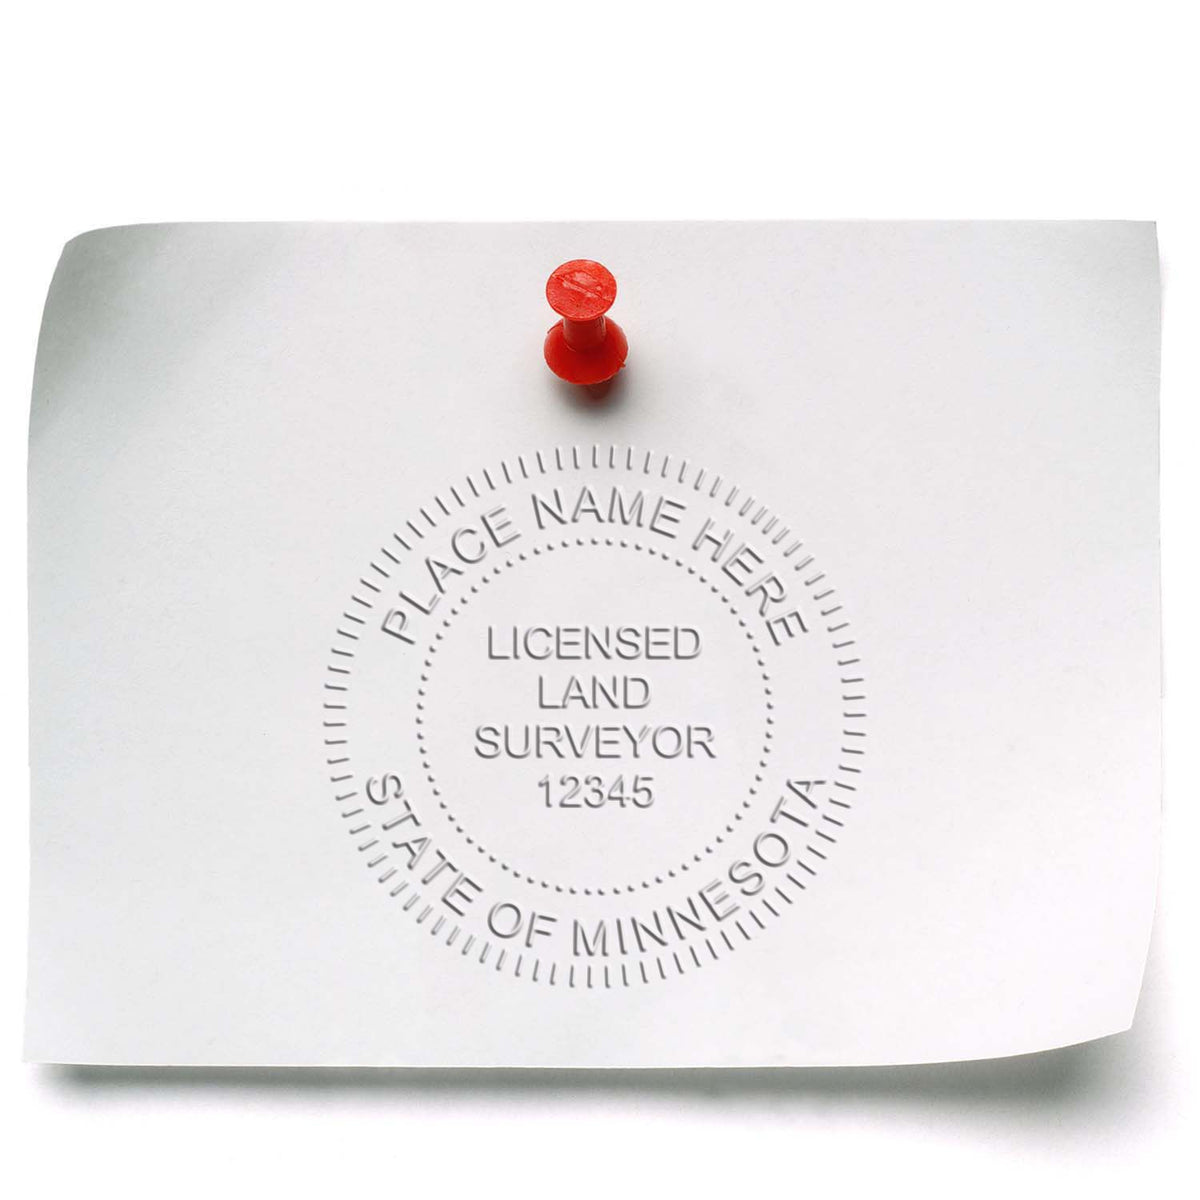 An alternative view of the Hybrid Minnesota Land Surveyor Seal stamped on a sheet of paper showing the image in use